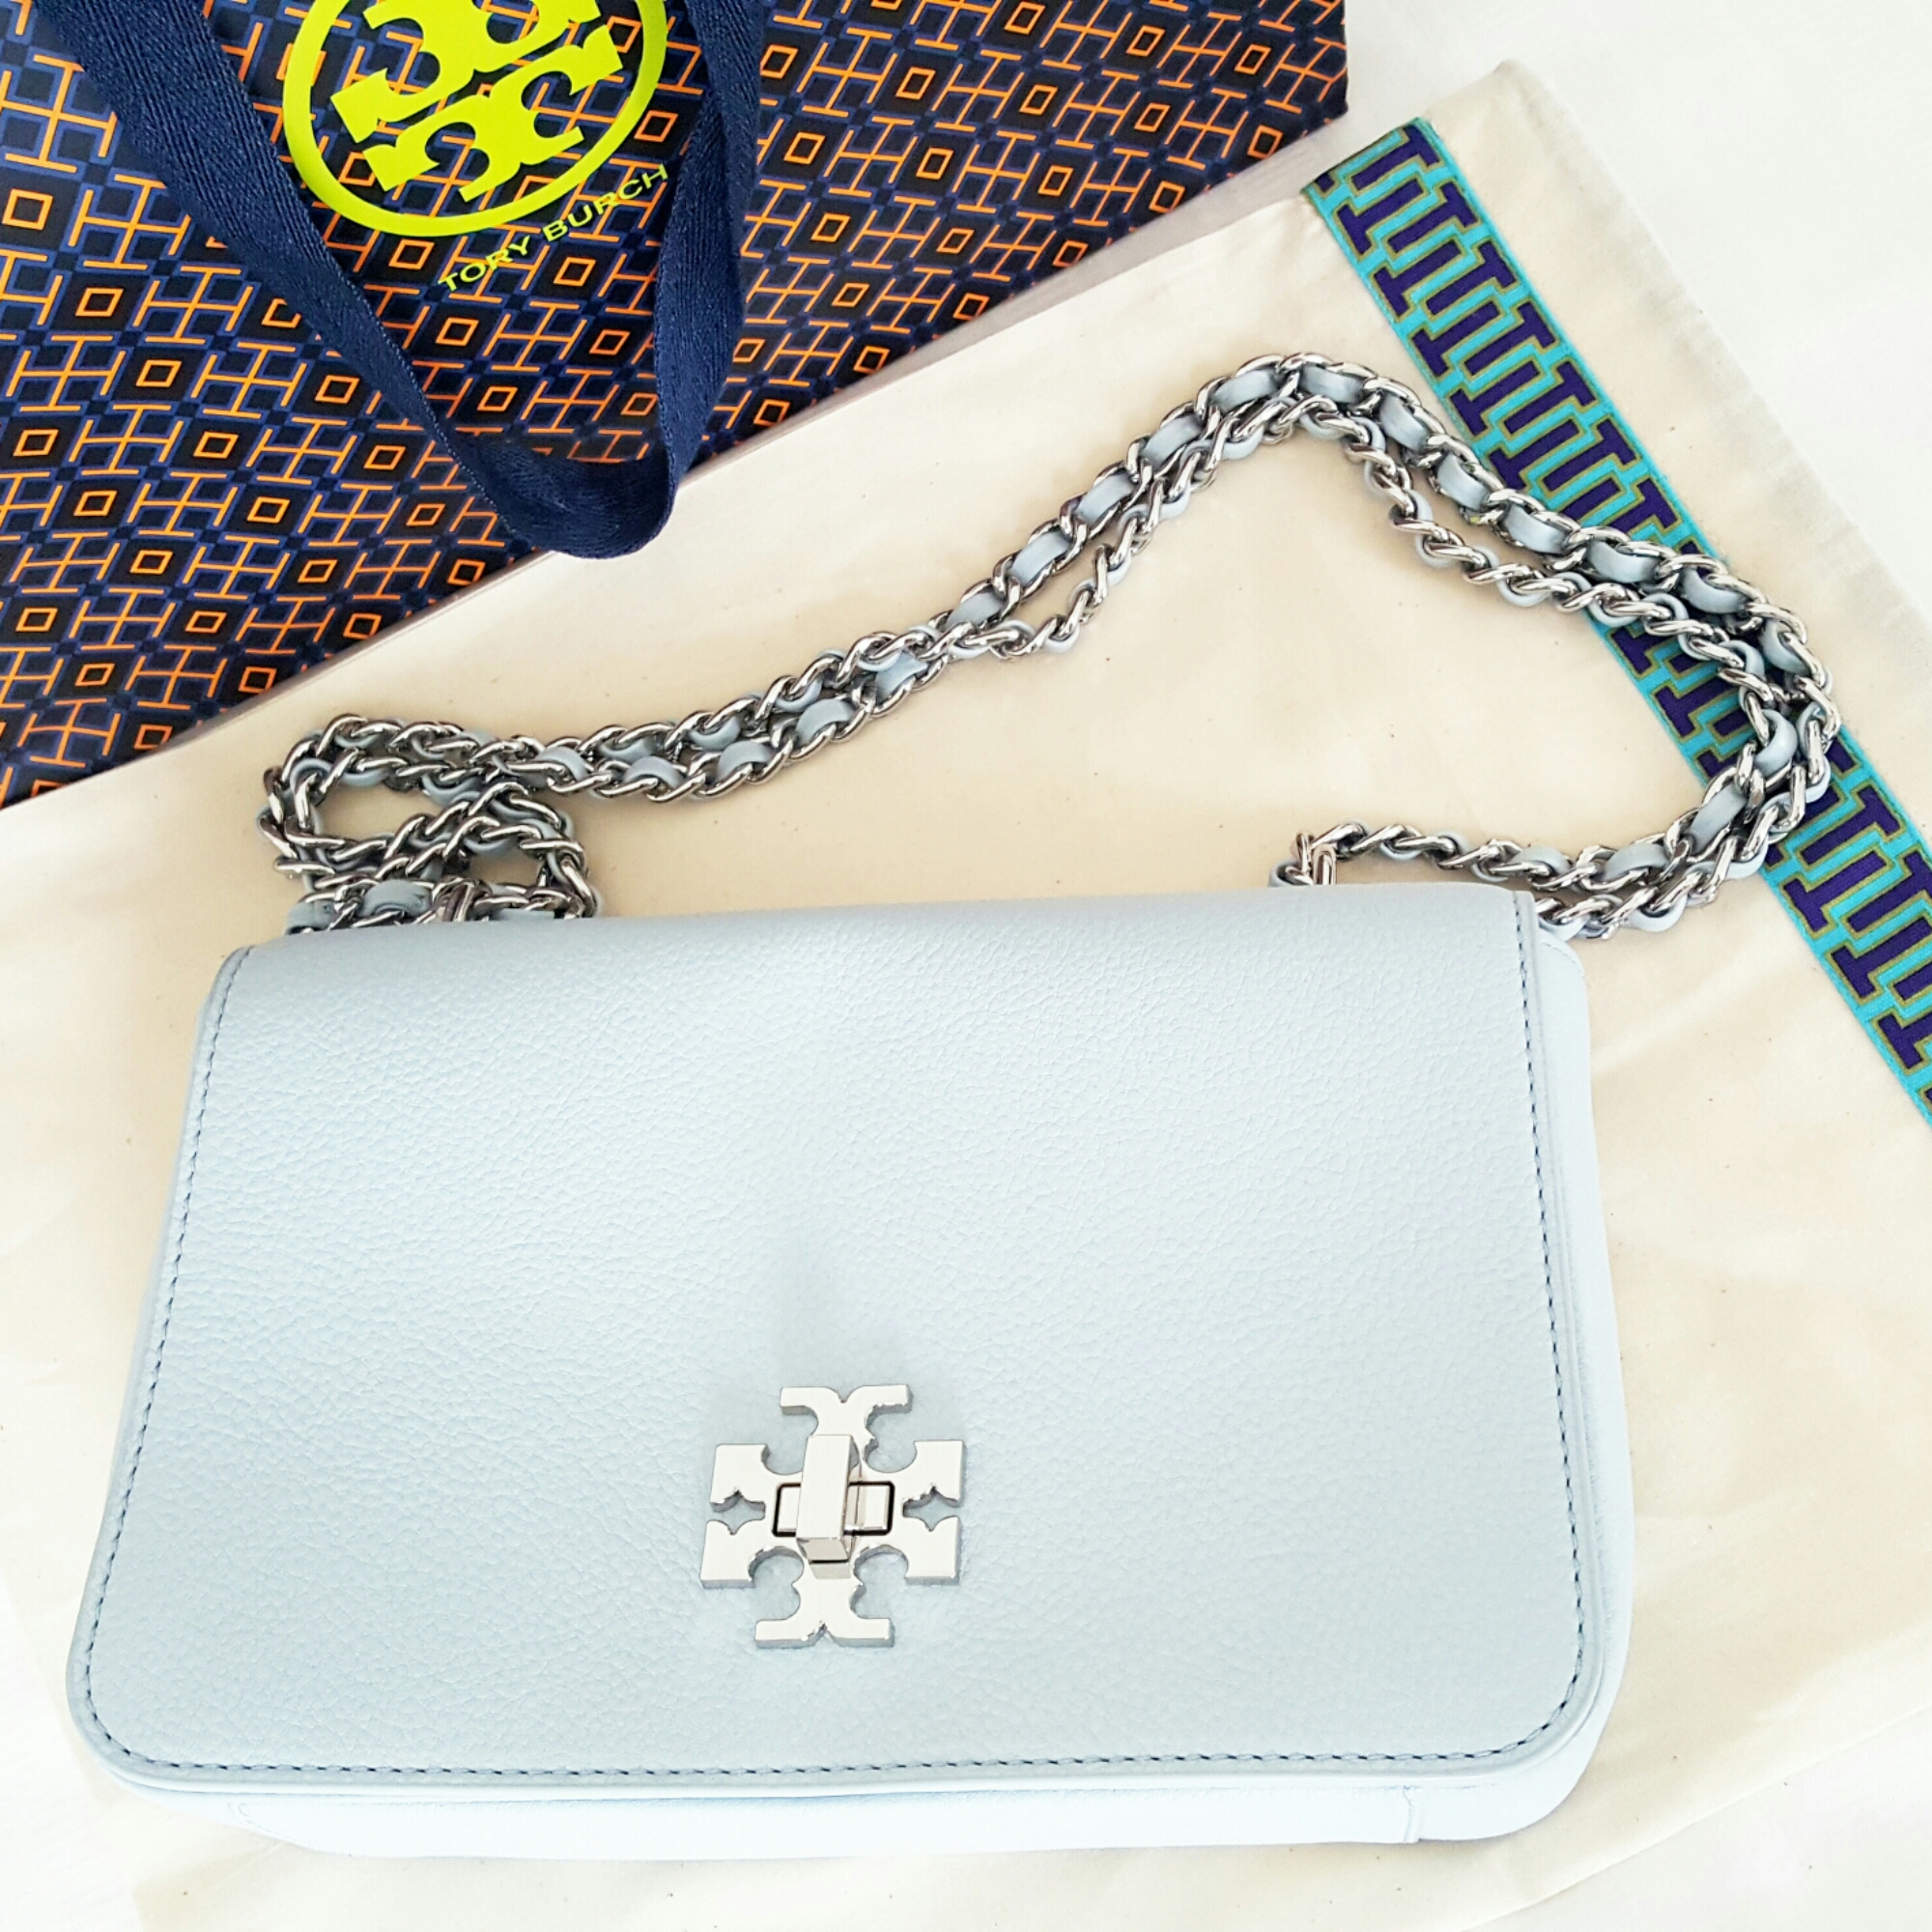 Finding love in Tory Burch – stylemewithlove